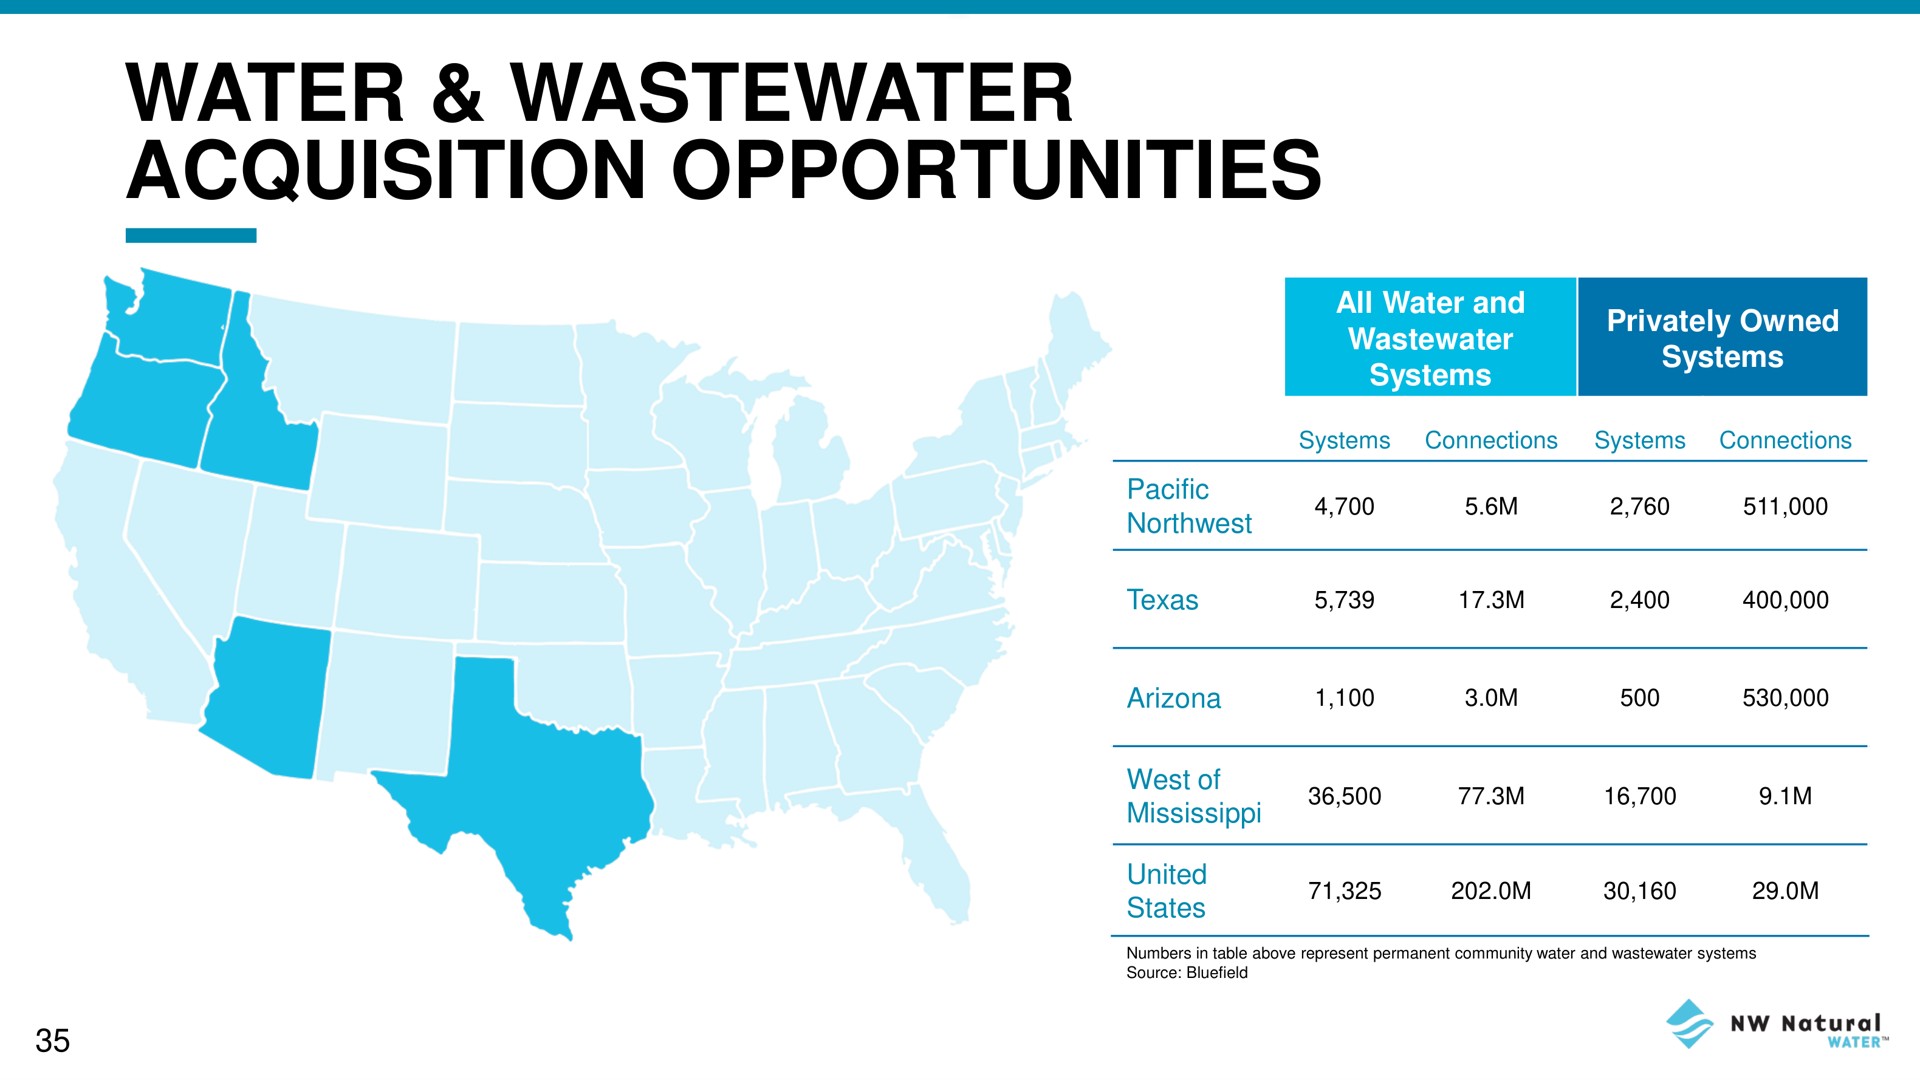 water acquisition opportunities | NW Natural Holdings